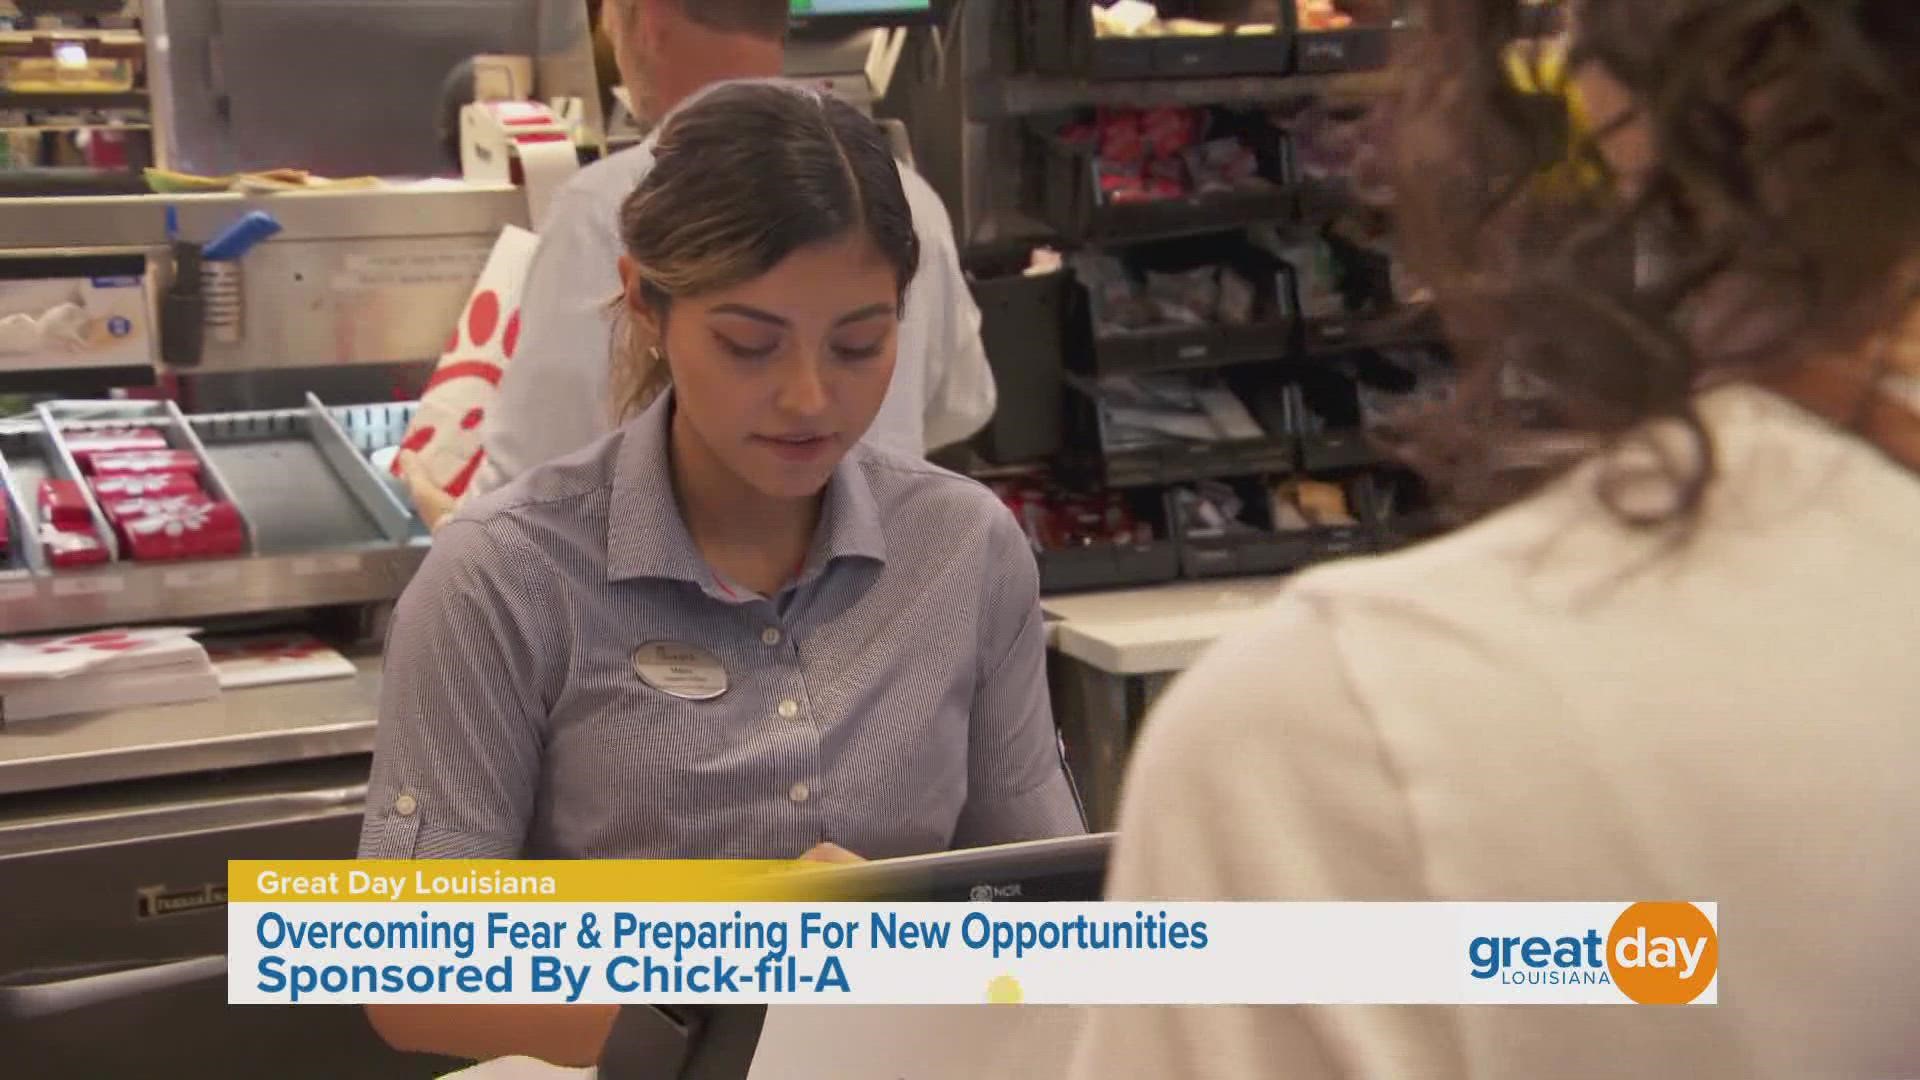 We meet Maria Fuentes, a Chick-fil-A team member, and she explains how working for the company has helped her overcome fear and grow her leadership skills.